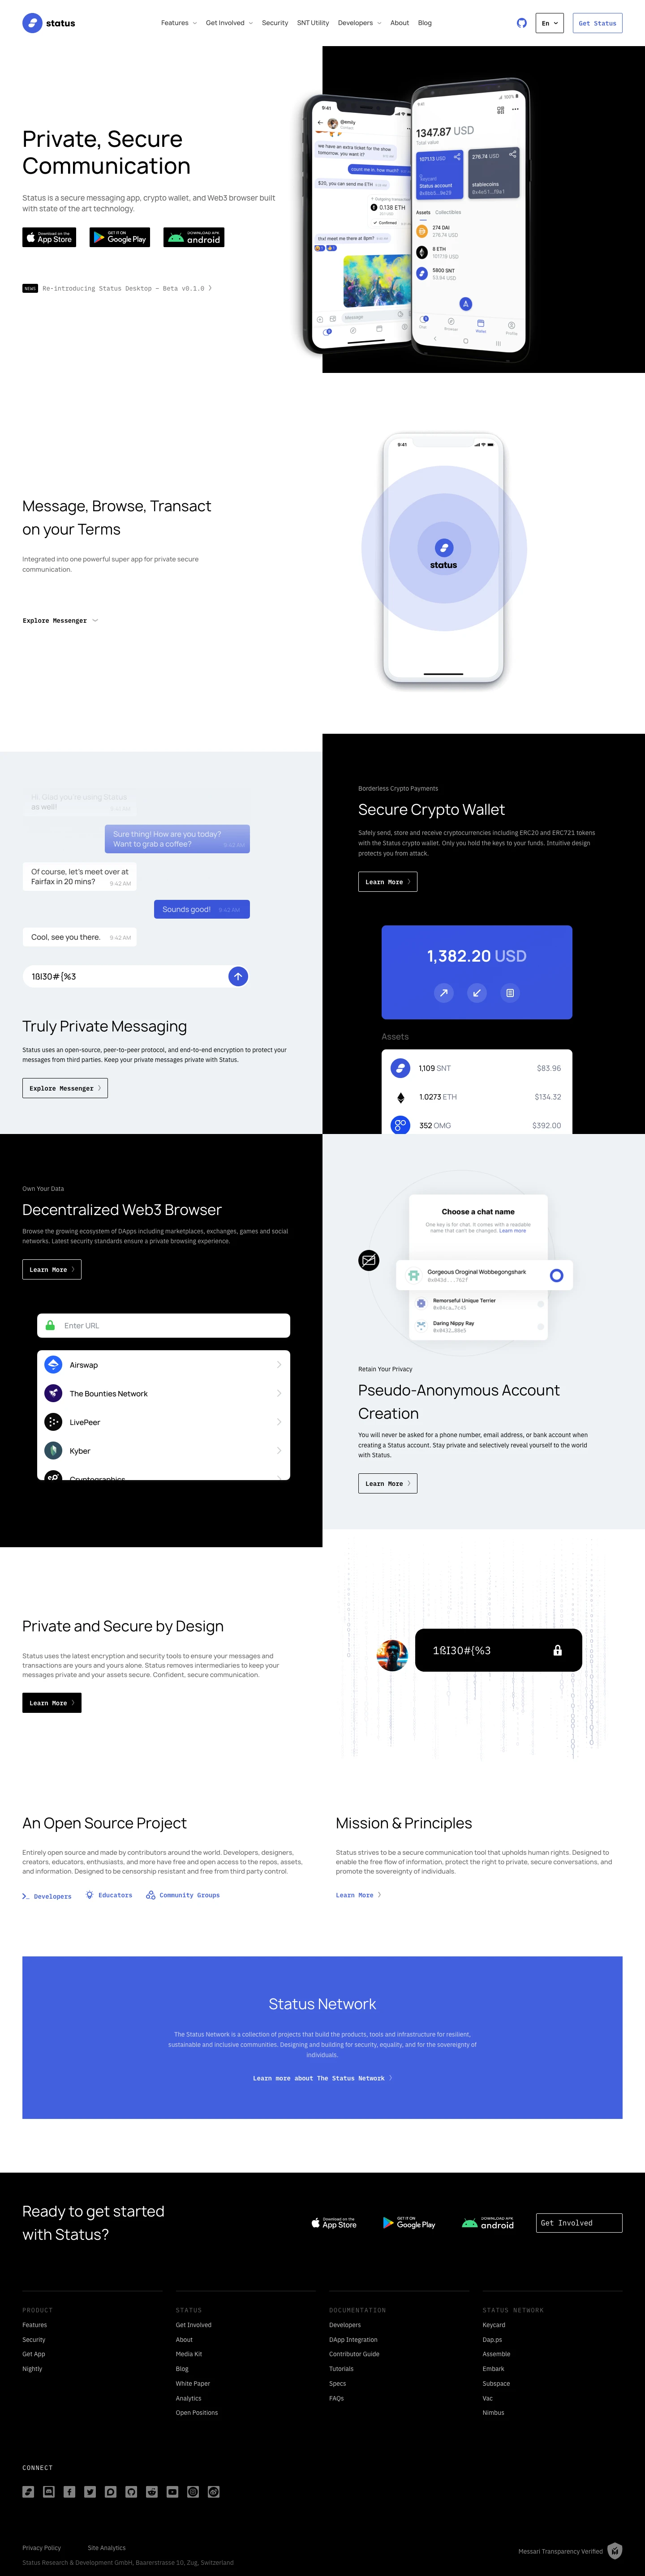 Status Landing Page Example: Status brings the power of Ethereum into your pocket by combining a messenger, crypto-wallet, and Web3 browser.